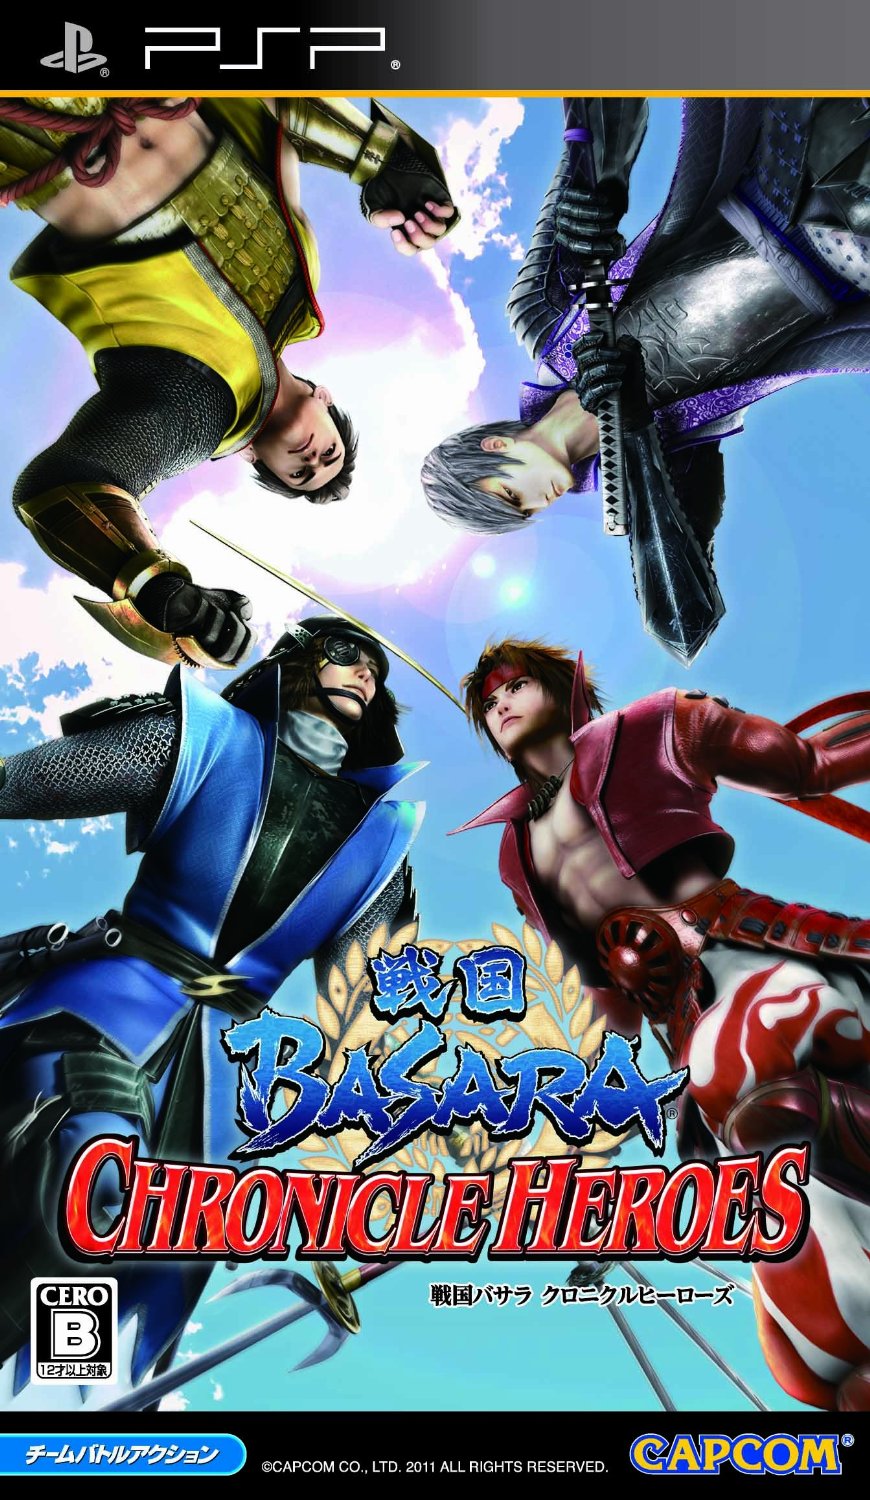 Download Basara Chronicle Heroes Highly Compressed (19 MB